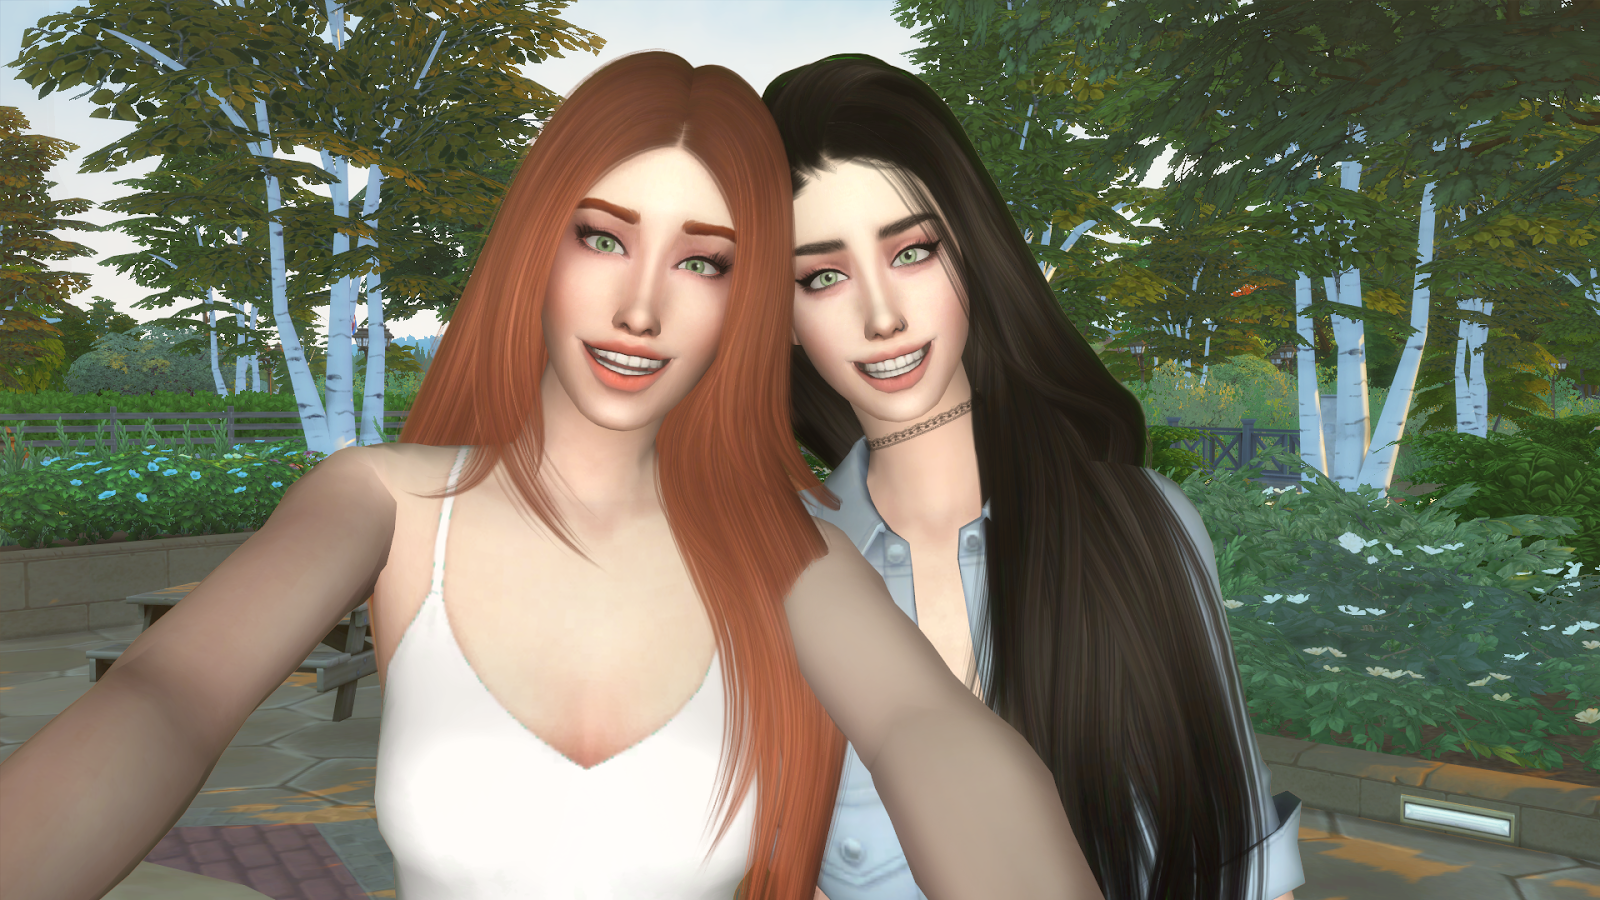 couple selfie poses sims 3